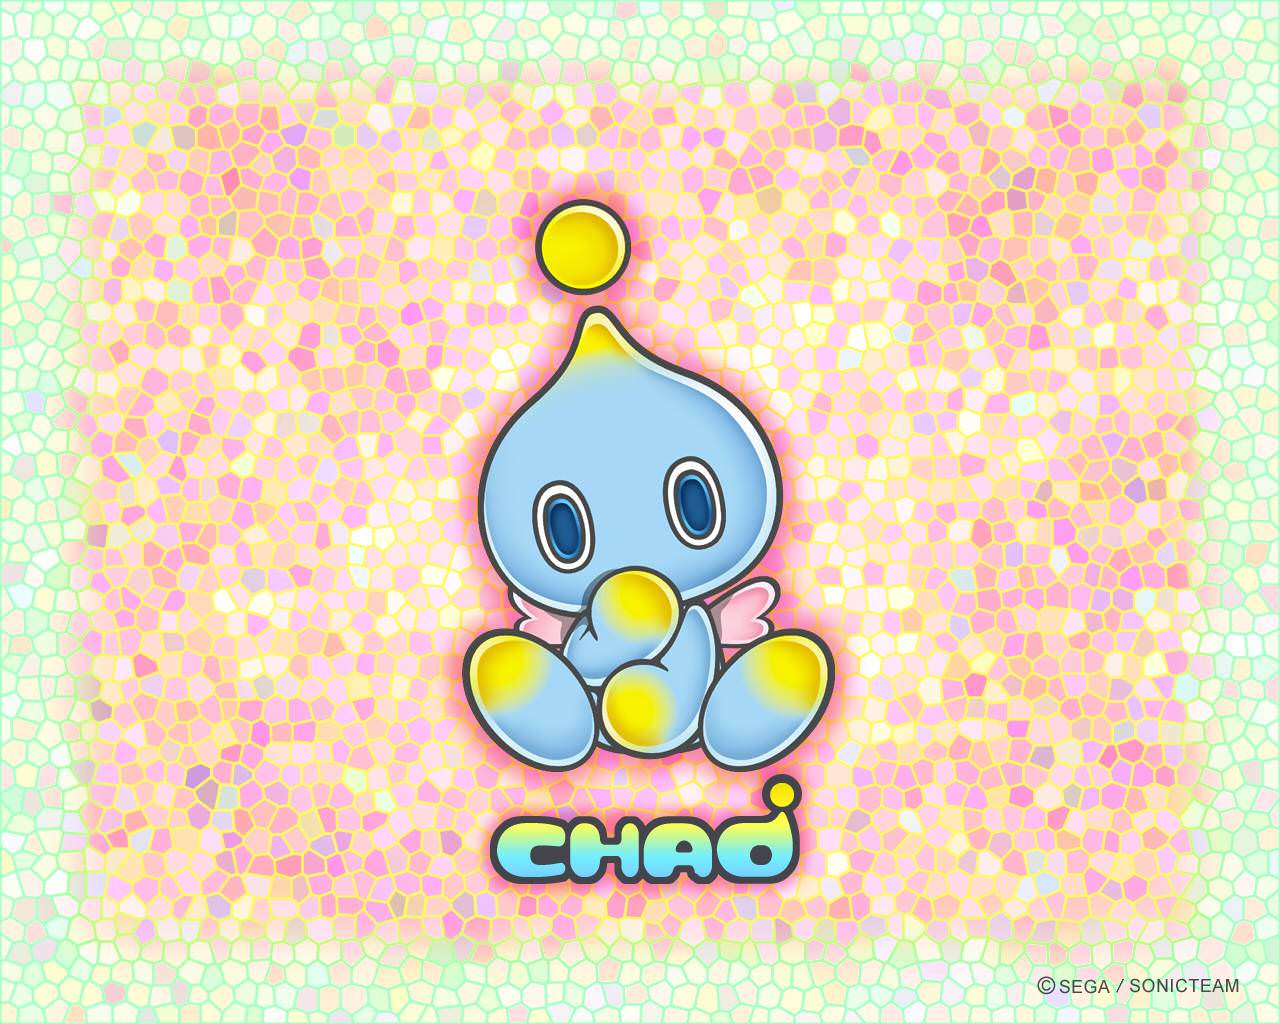 Chao Island official Chao wallpaper!